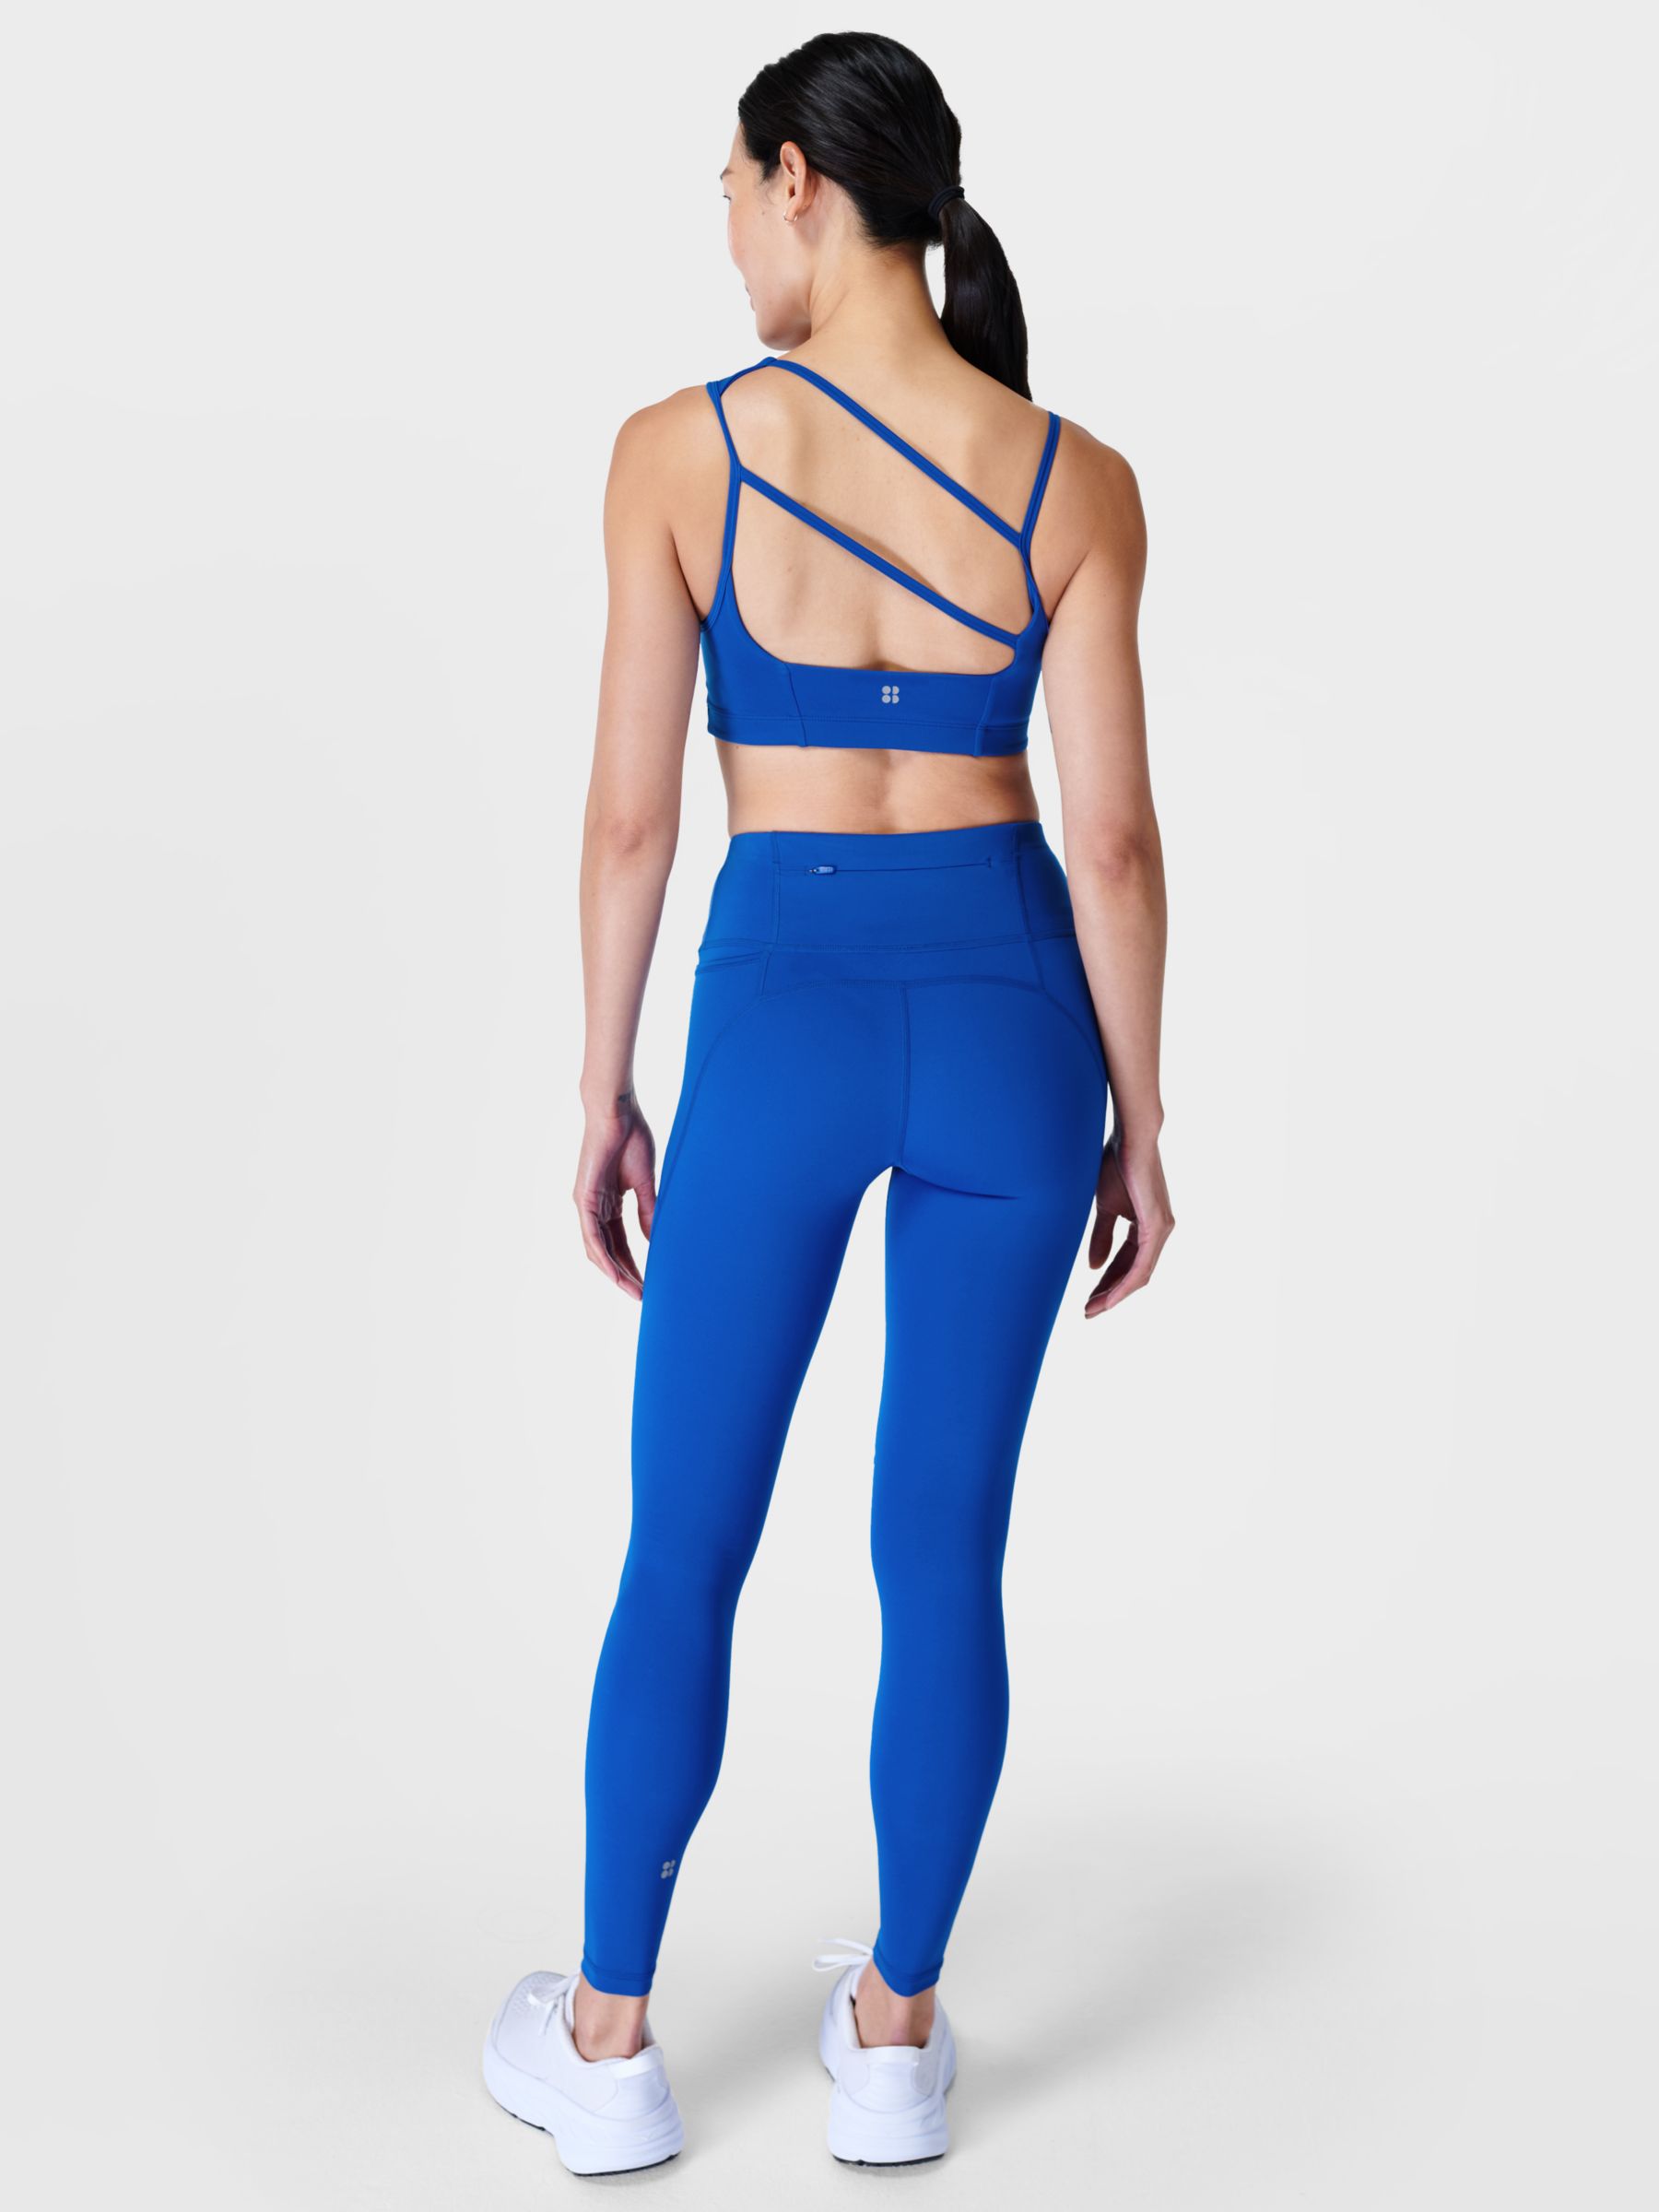 Hero blue align pant II size 6  Outfits with leggings, Lululemon align  pant, Pants for women